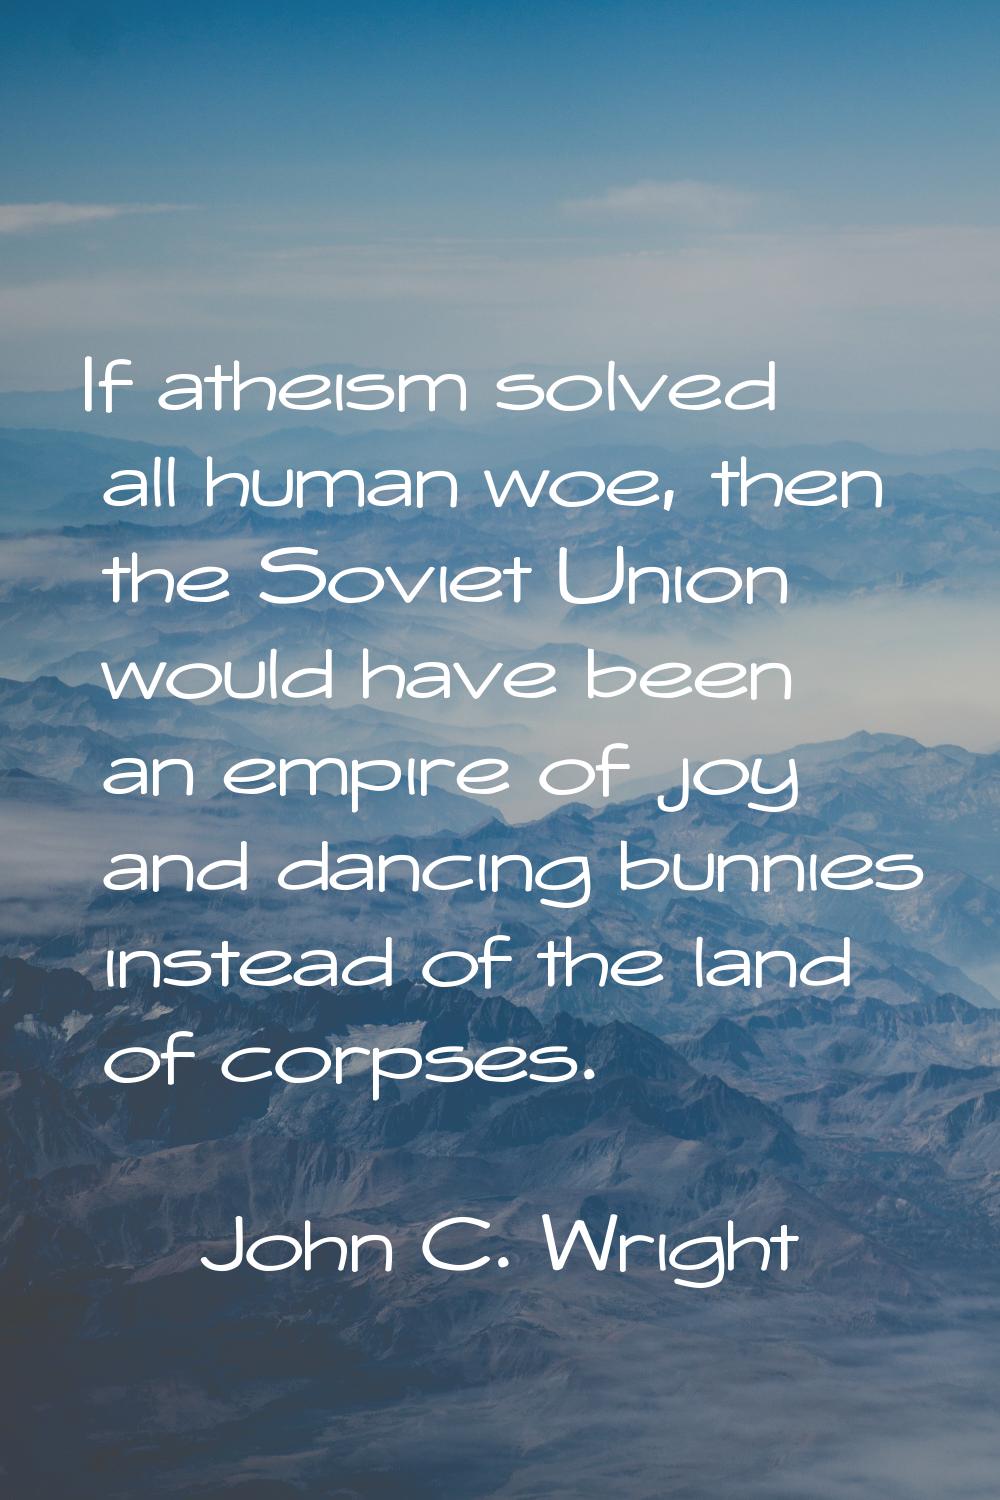 If atheism solved all human woe, then the Soviet Union would have been an empire of joy and dancing